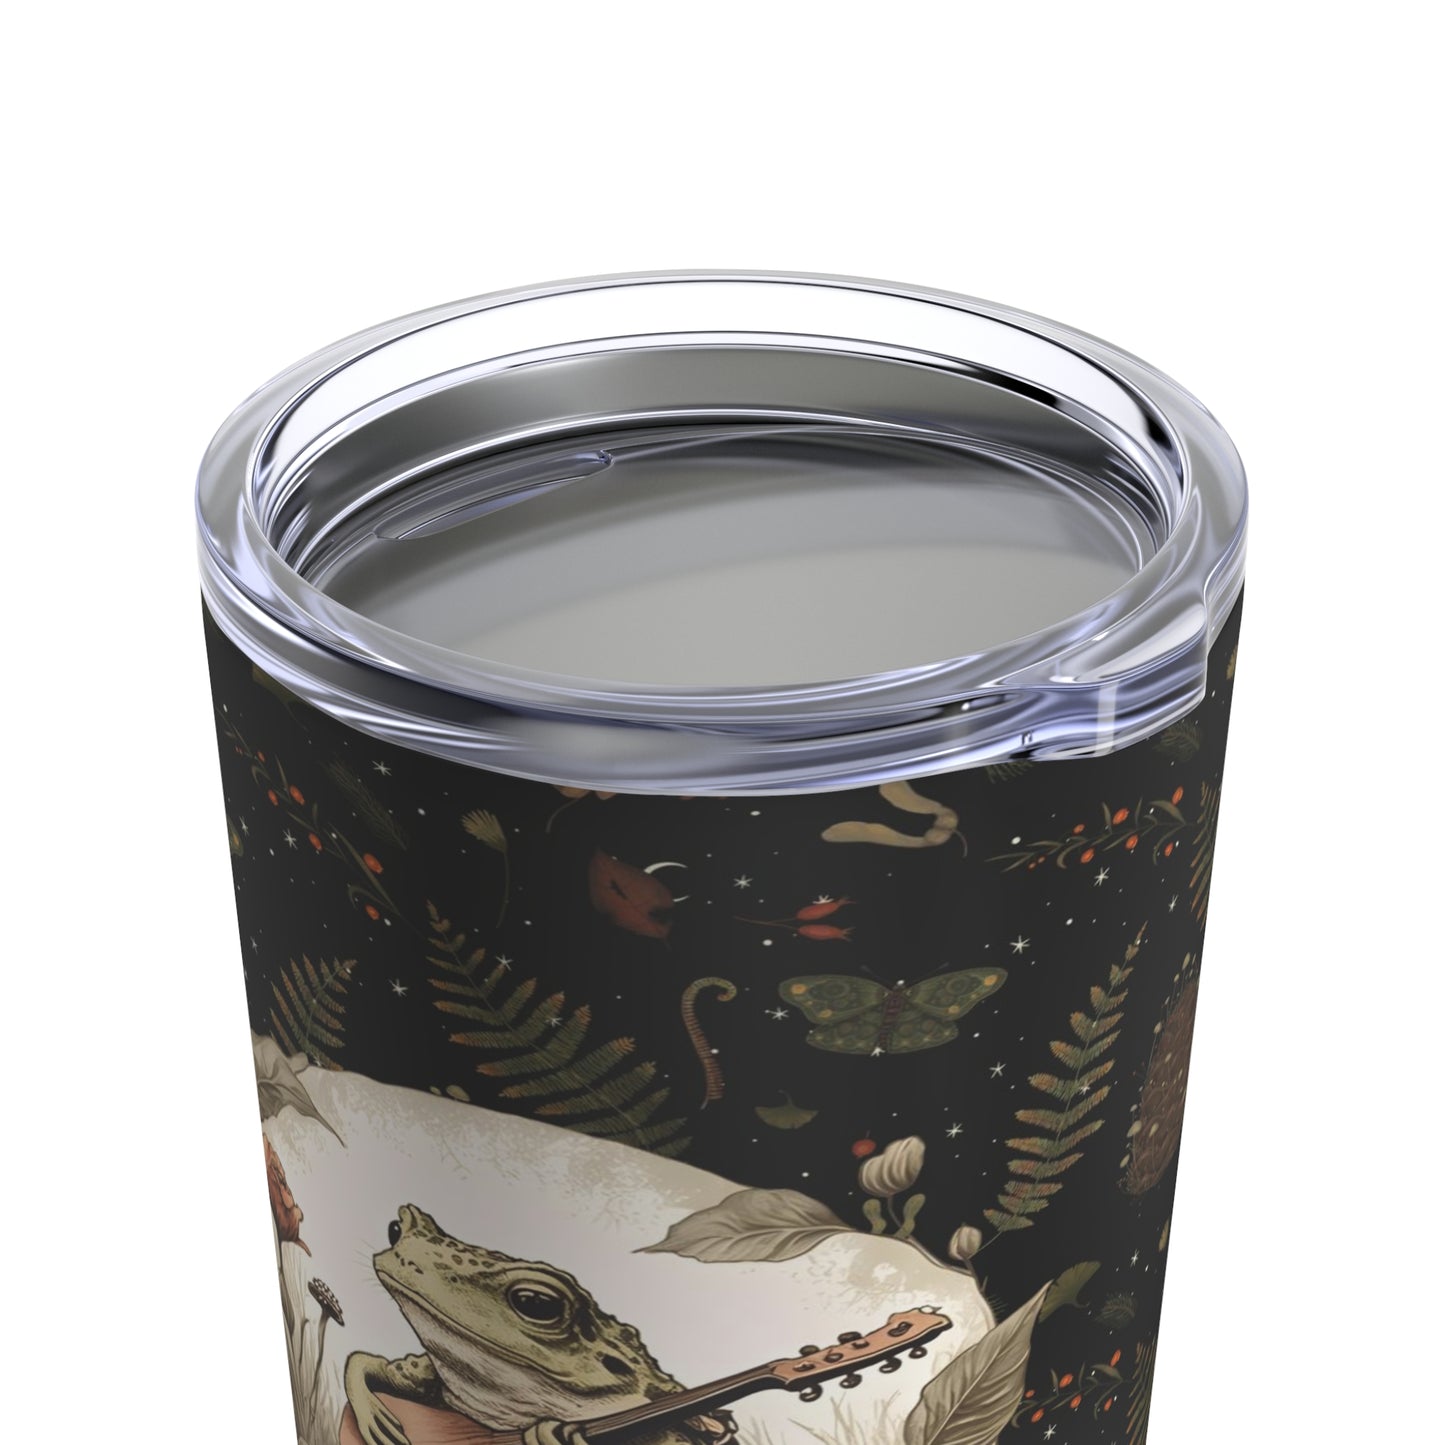 Frog Tumbler 20oz. Cottagecore tumbler for her or him. Toad tumbler for him. Birthday gift ideas